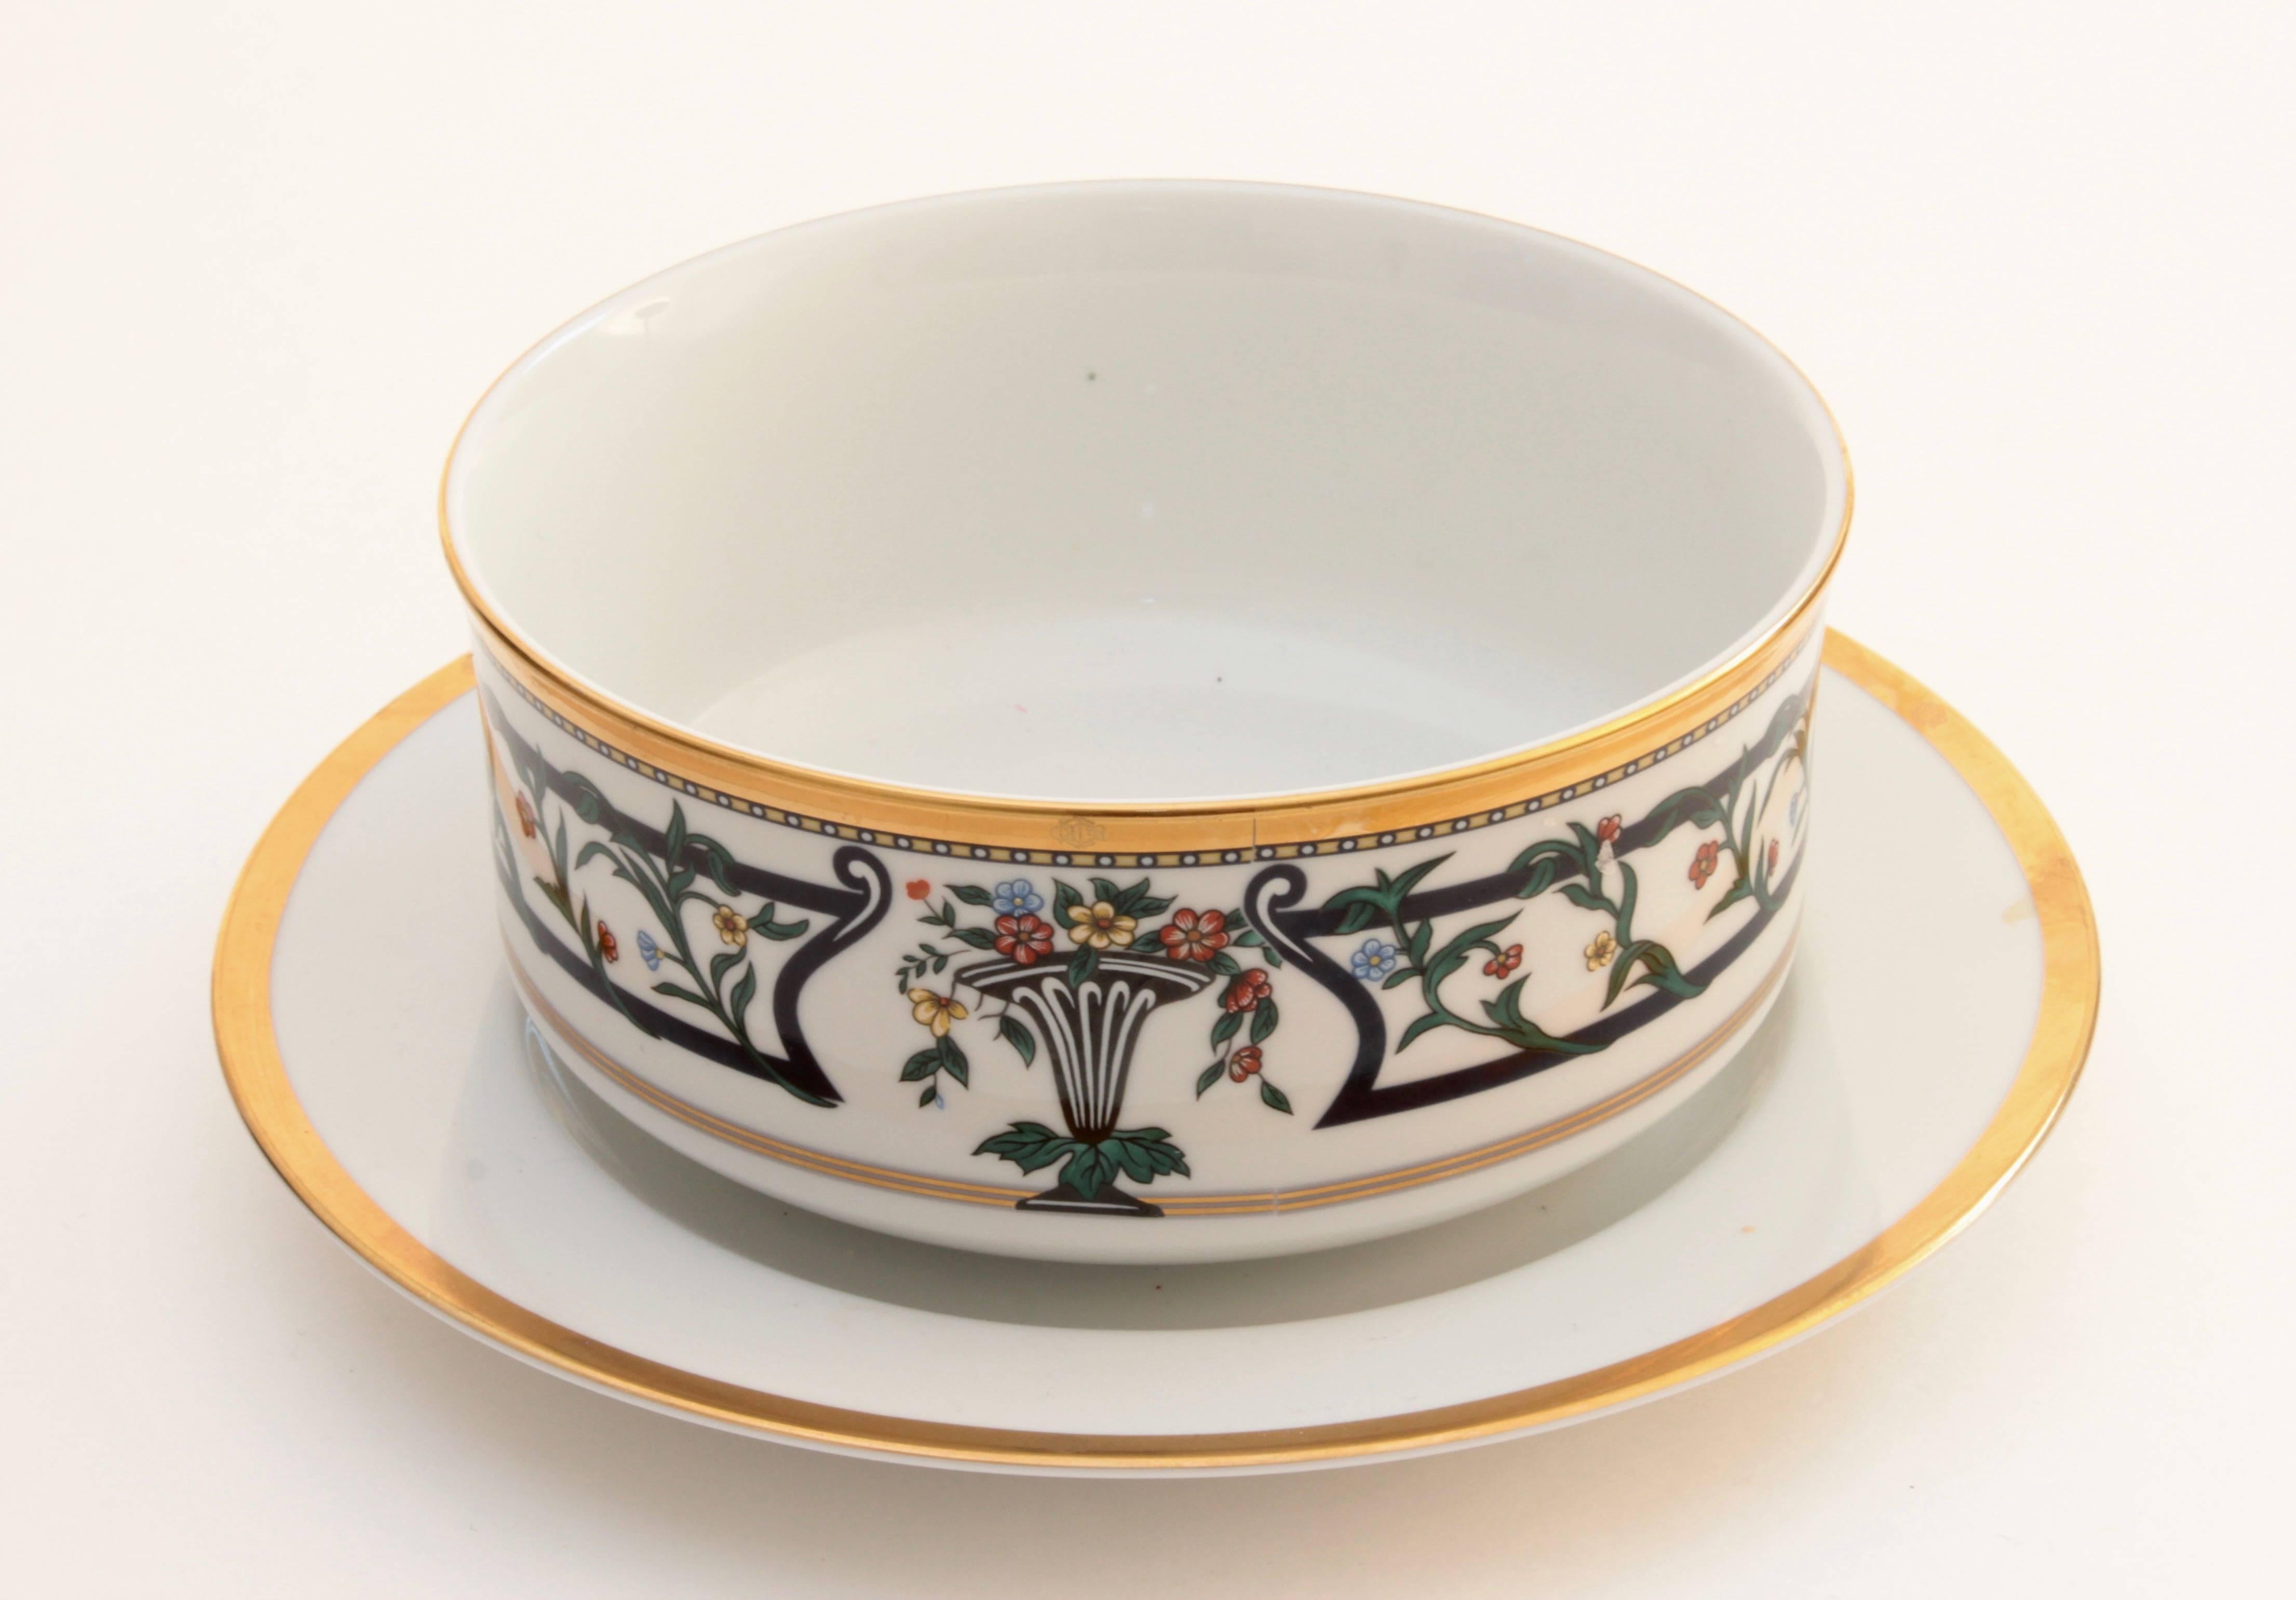 This porcelain china gravy boat was designed by Christian Dior during the late 1990s.  This piece is new/old stock, still retains its retail sticker (marked out to prevent retail returns) and is in excellent unused condition.  The bowl measures